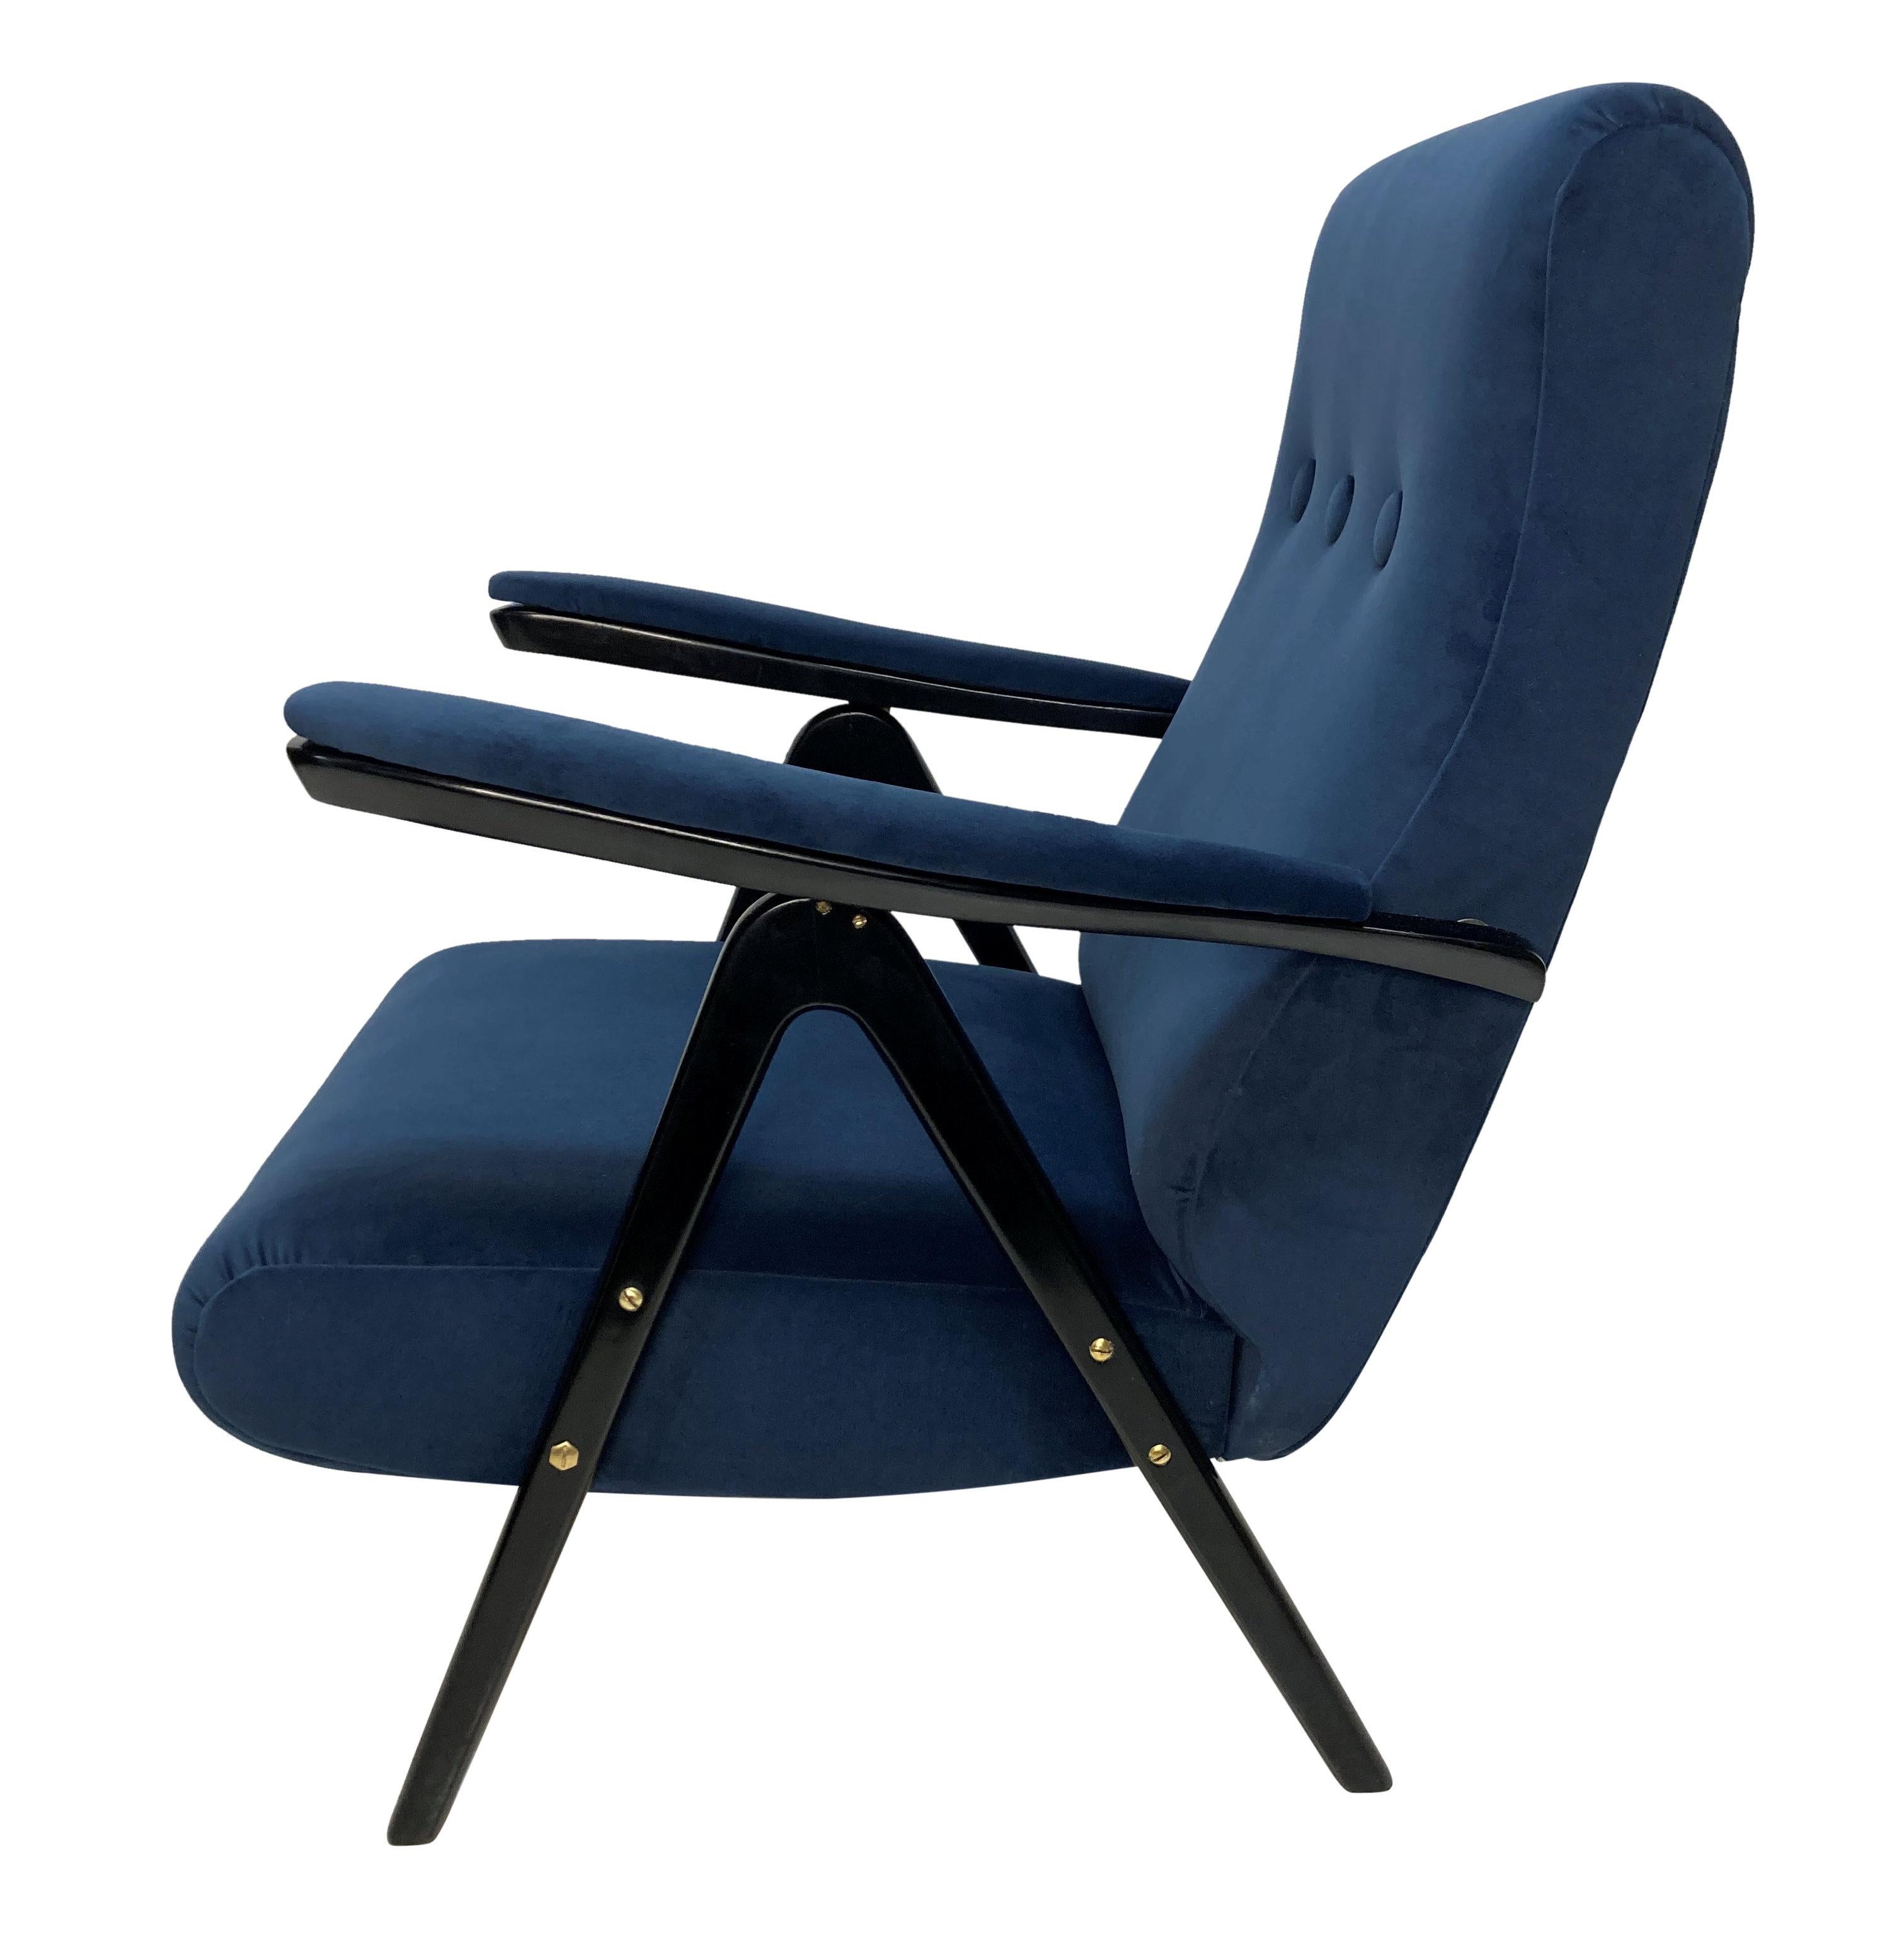 An Italian Mid-Century reclining armchair by Cassina, with ebonised frame and newly upholstered in blue velvet.